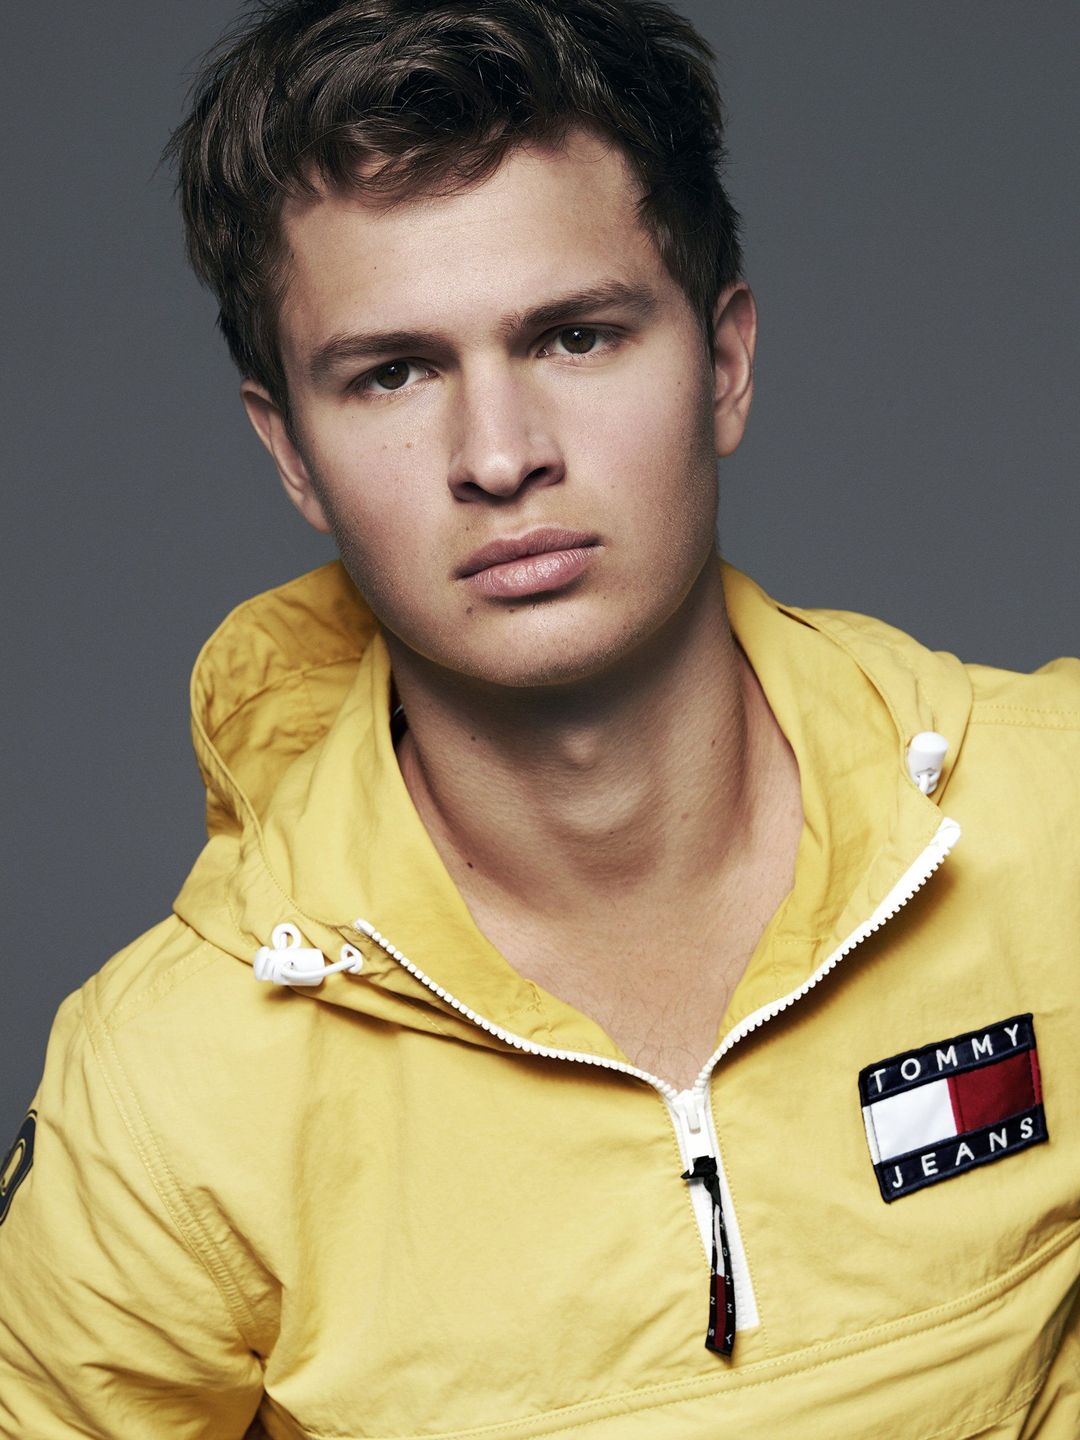 Ansel Elgort early life